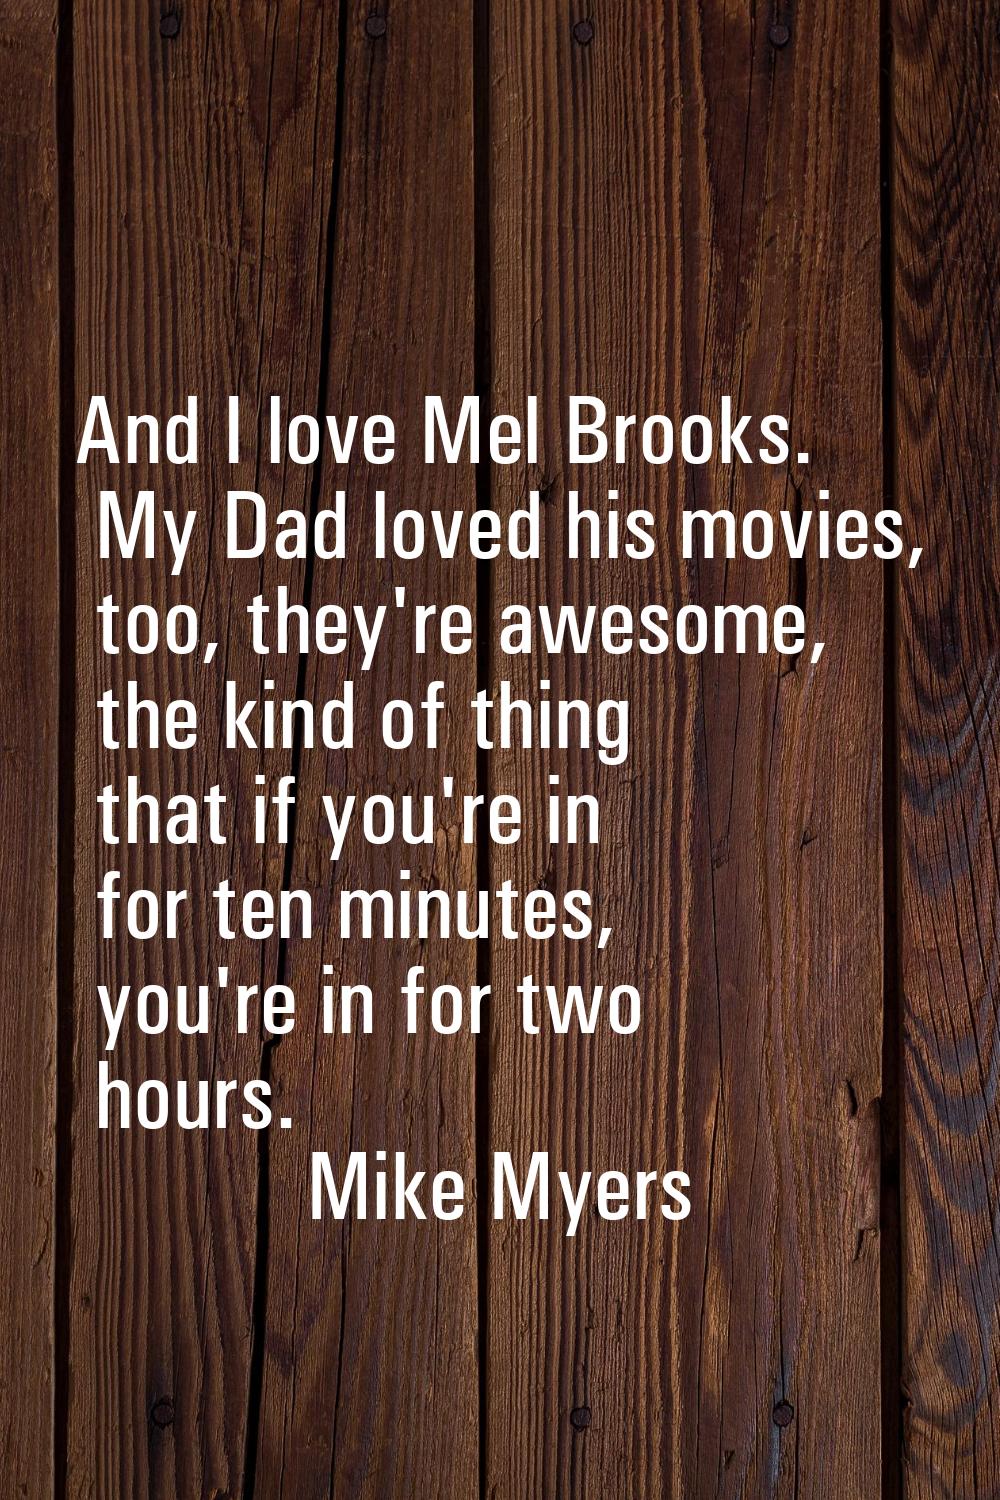 And I love Mel Brooks. My Dad loved his movies, too, they're awesome, the kind of thing that if you